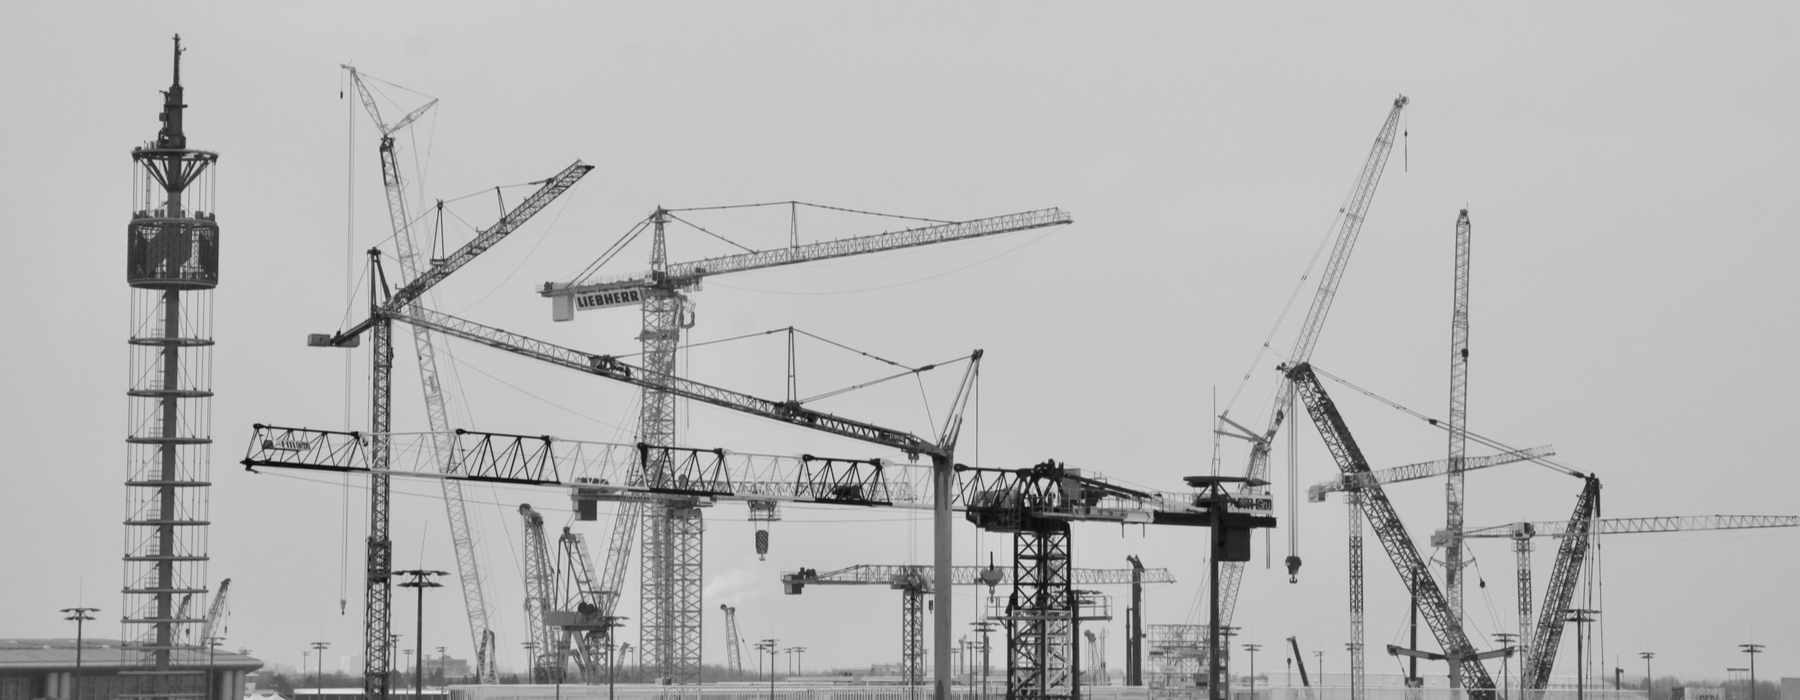 Different Types of Cranes To consider while choosing the one for your business